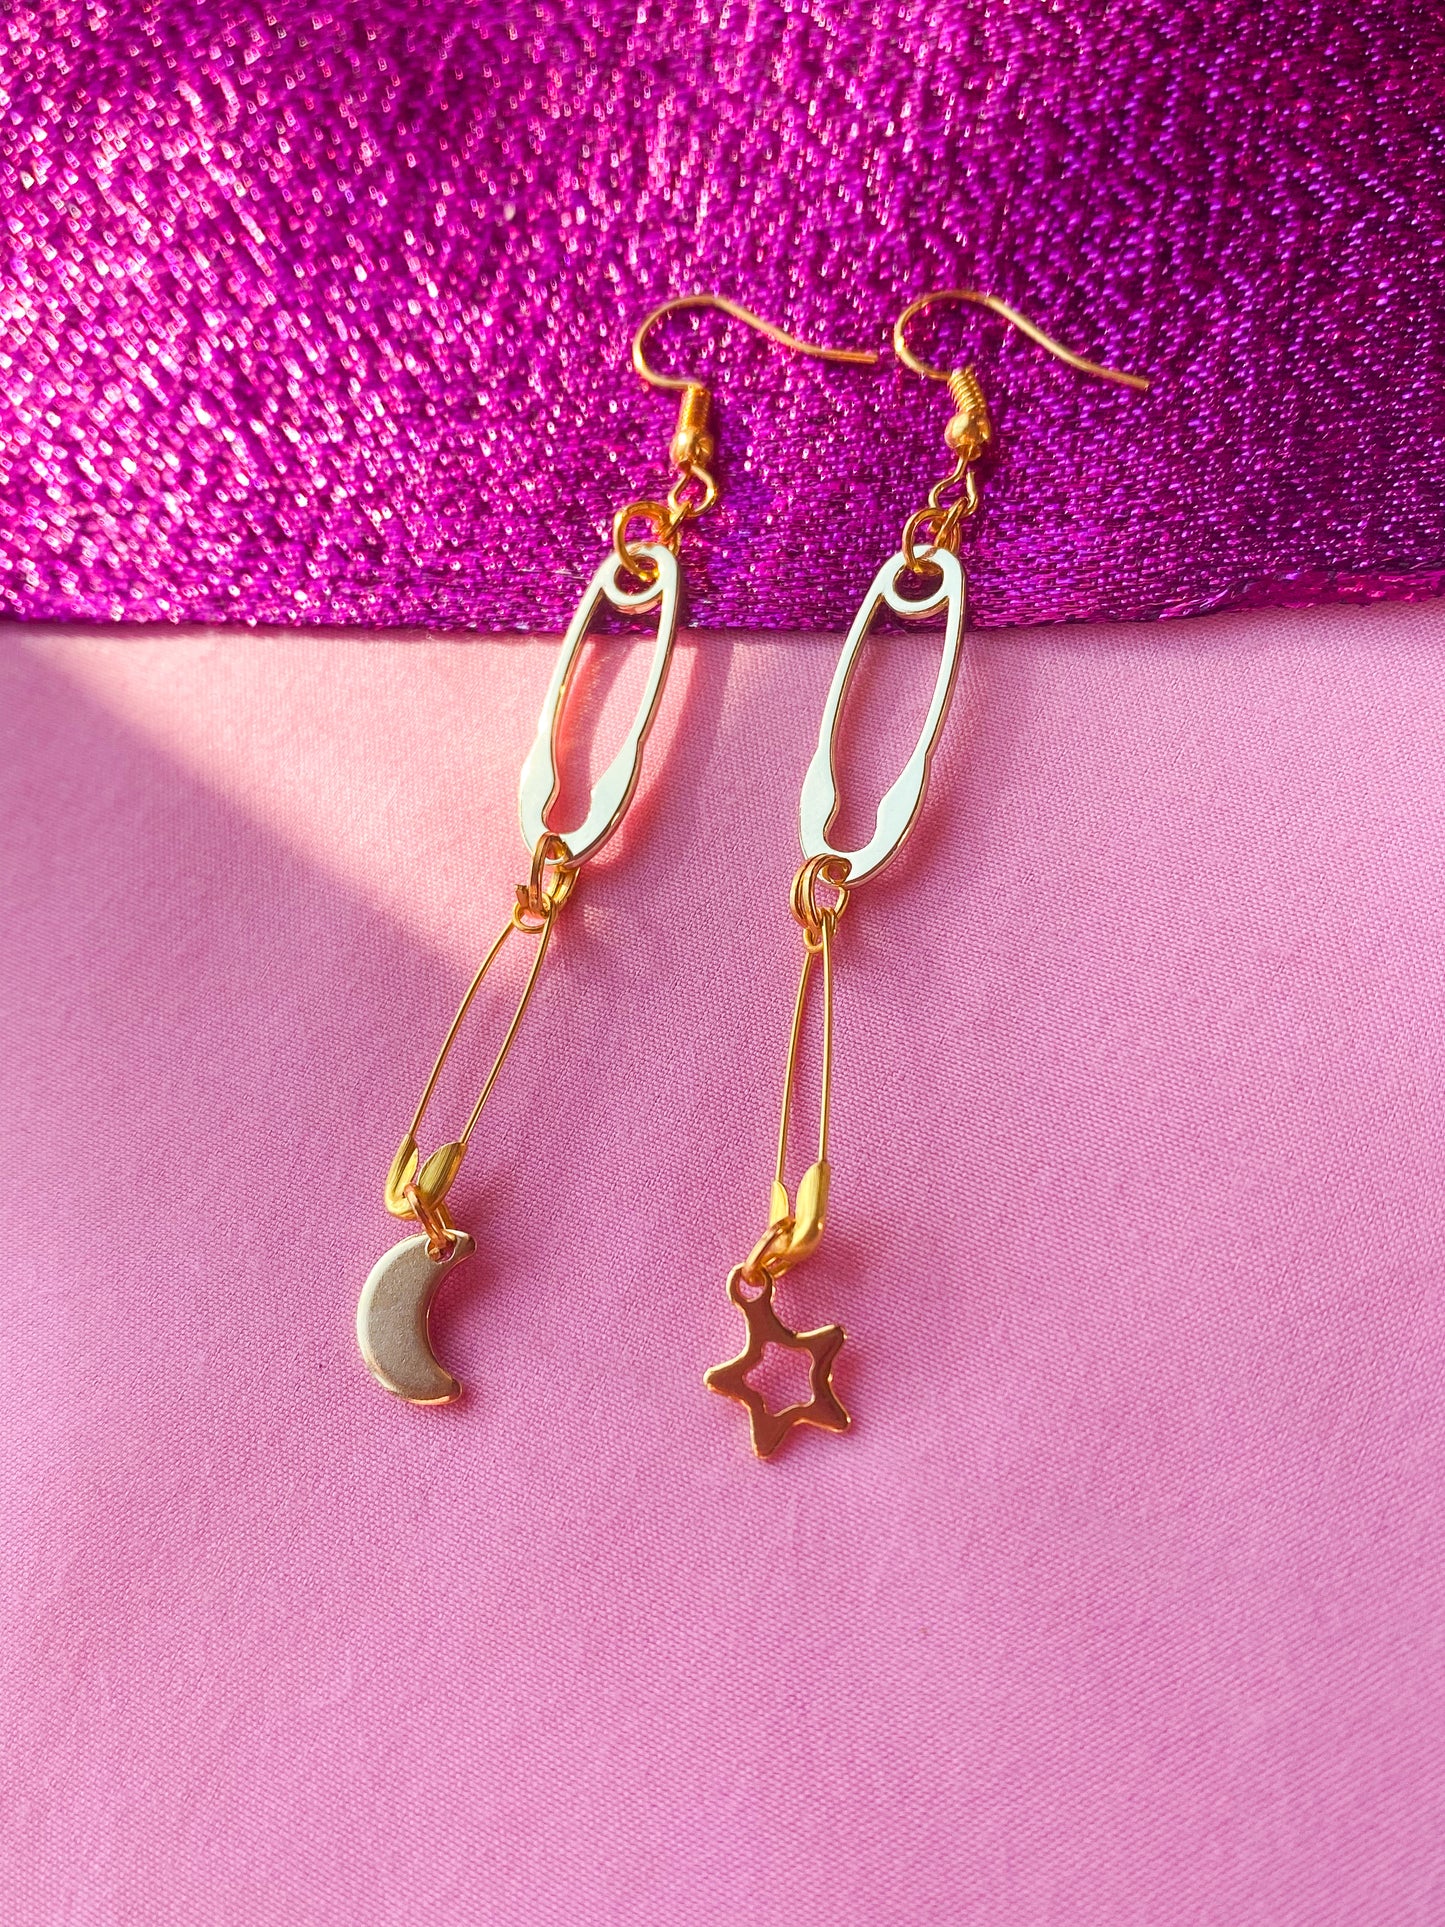 Gold safety pin with moon and star charm earrings